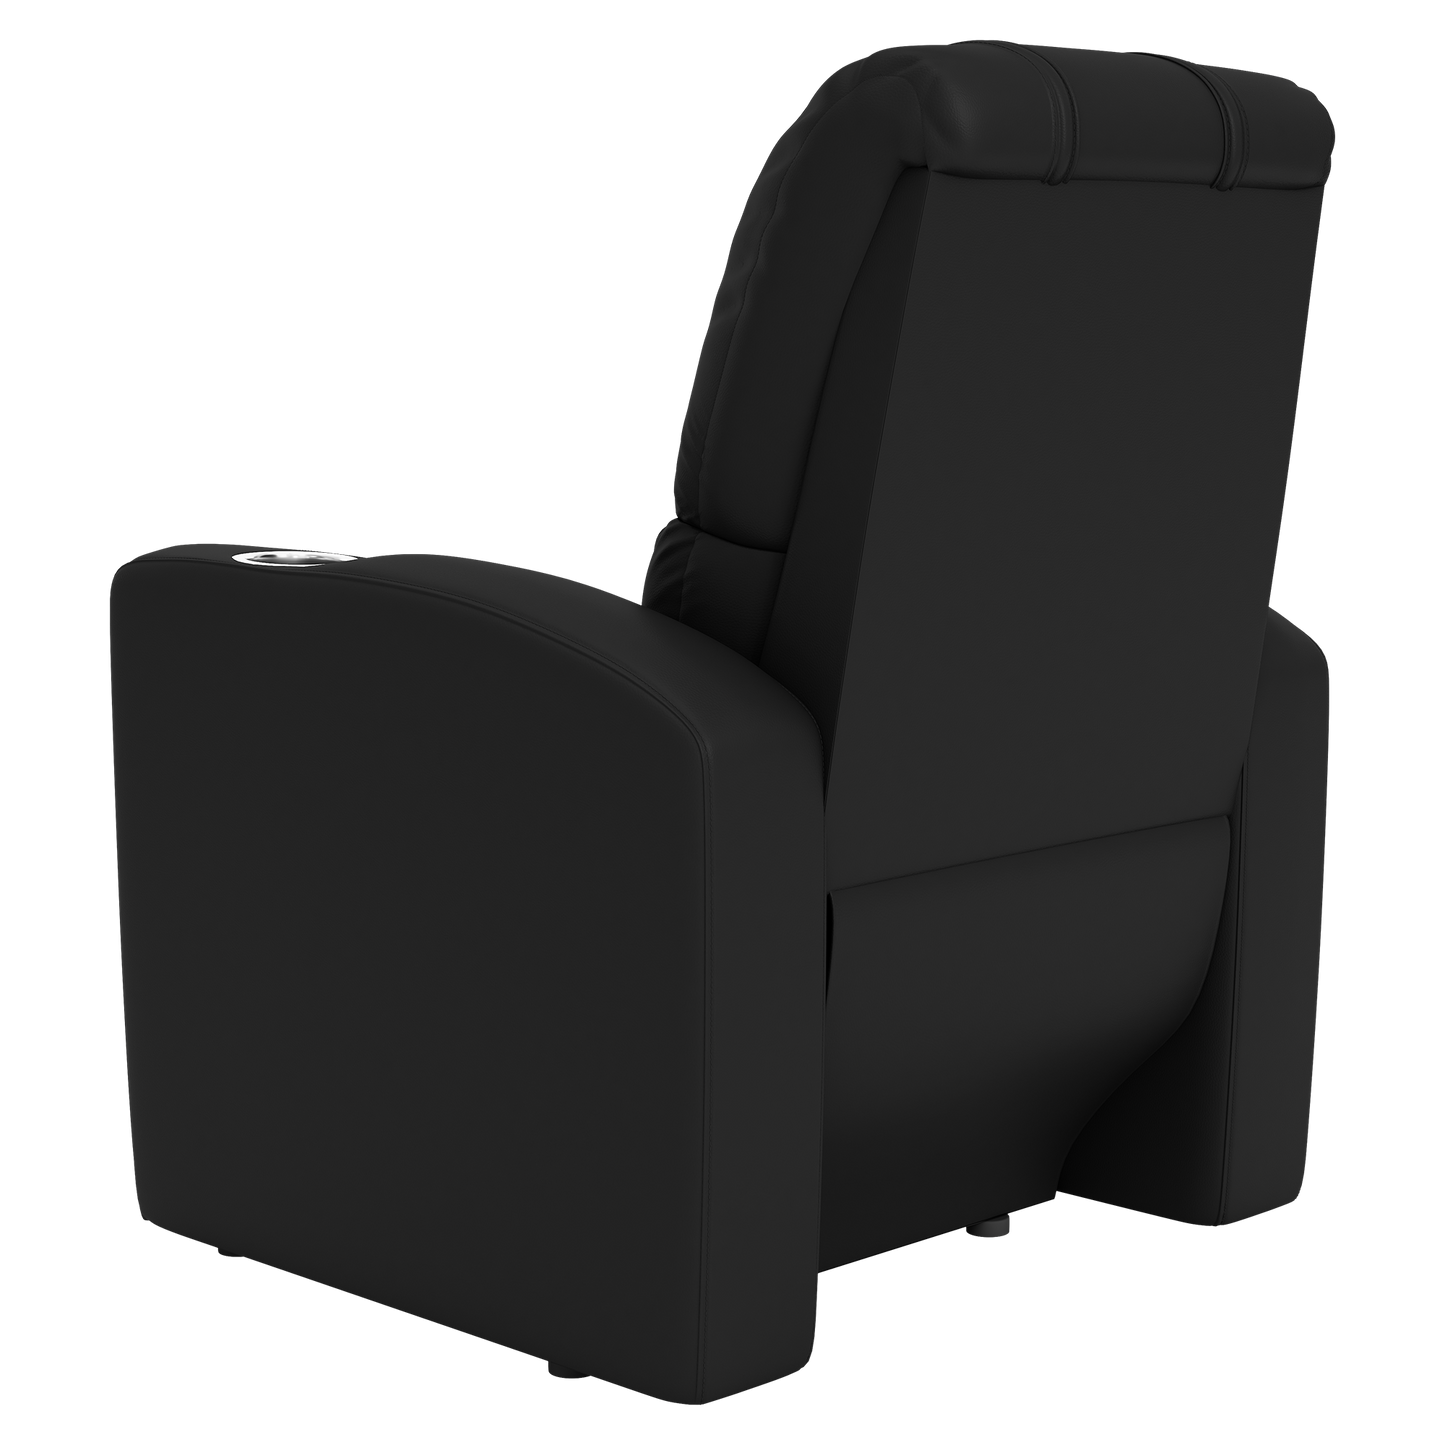 Stealth Recliner with Bemidji State University Primary Logo